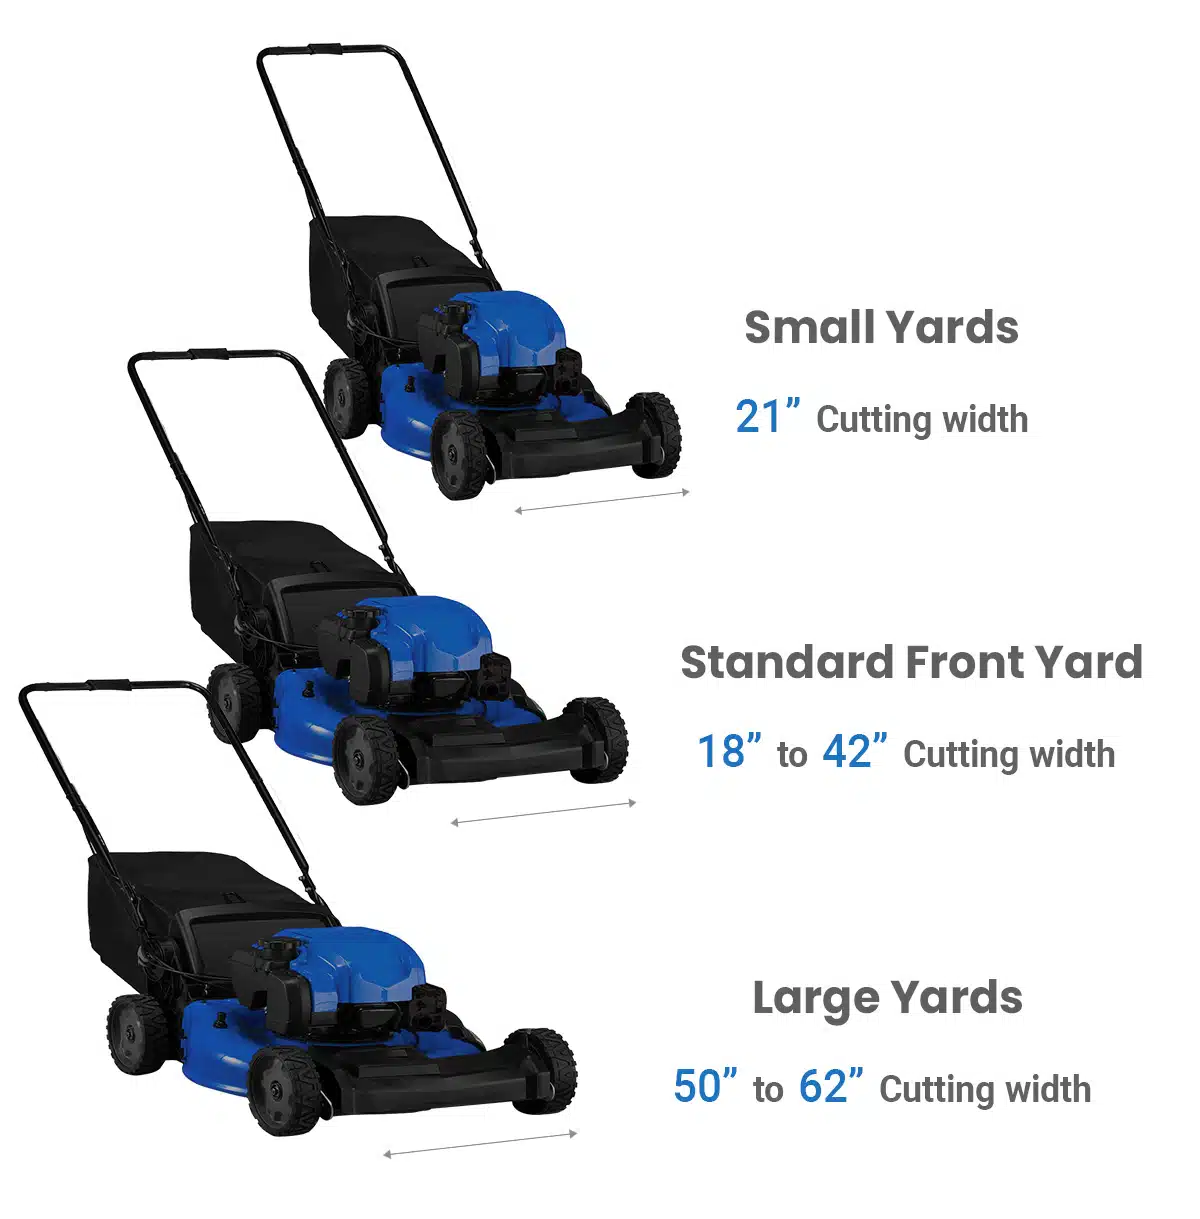 Lawn mower sizes for small yards